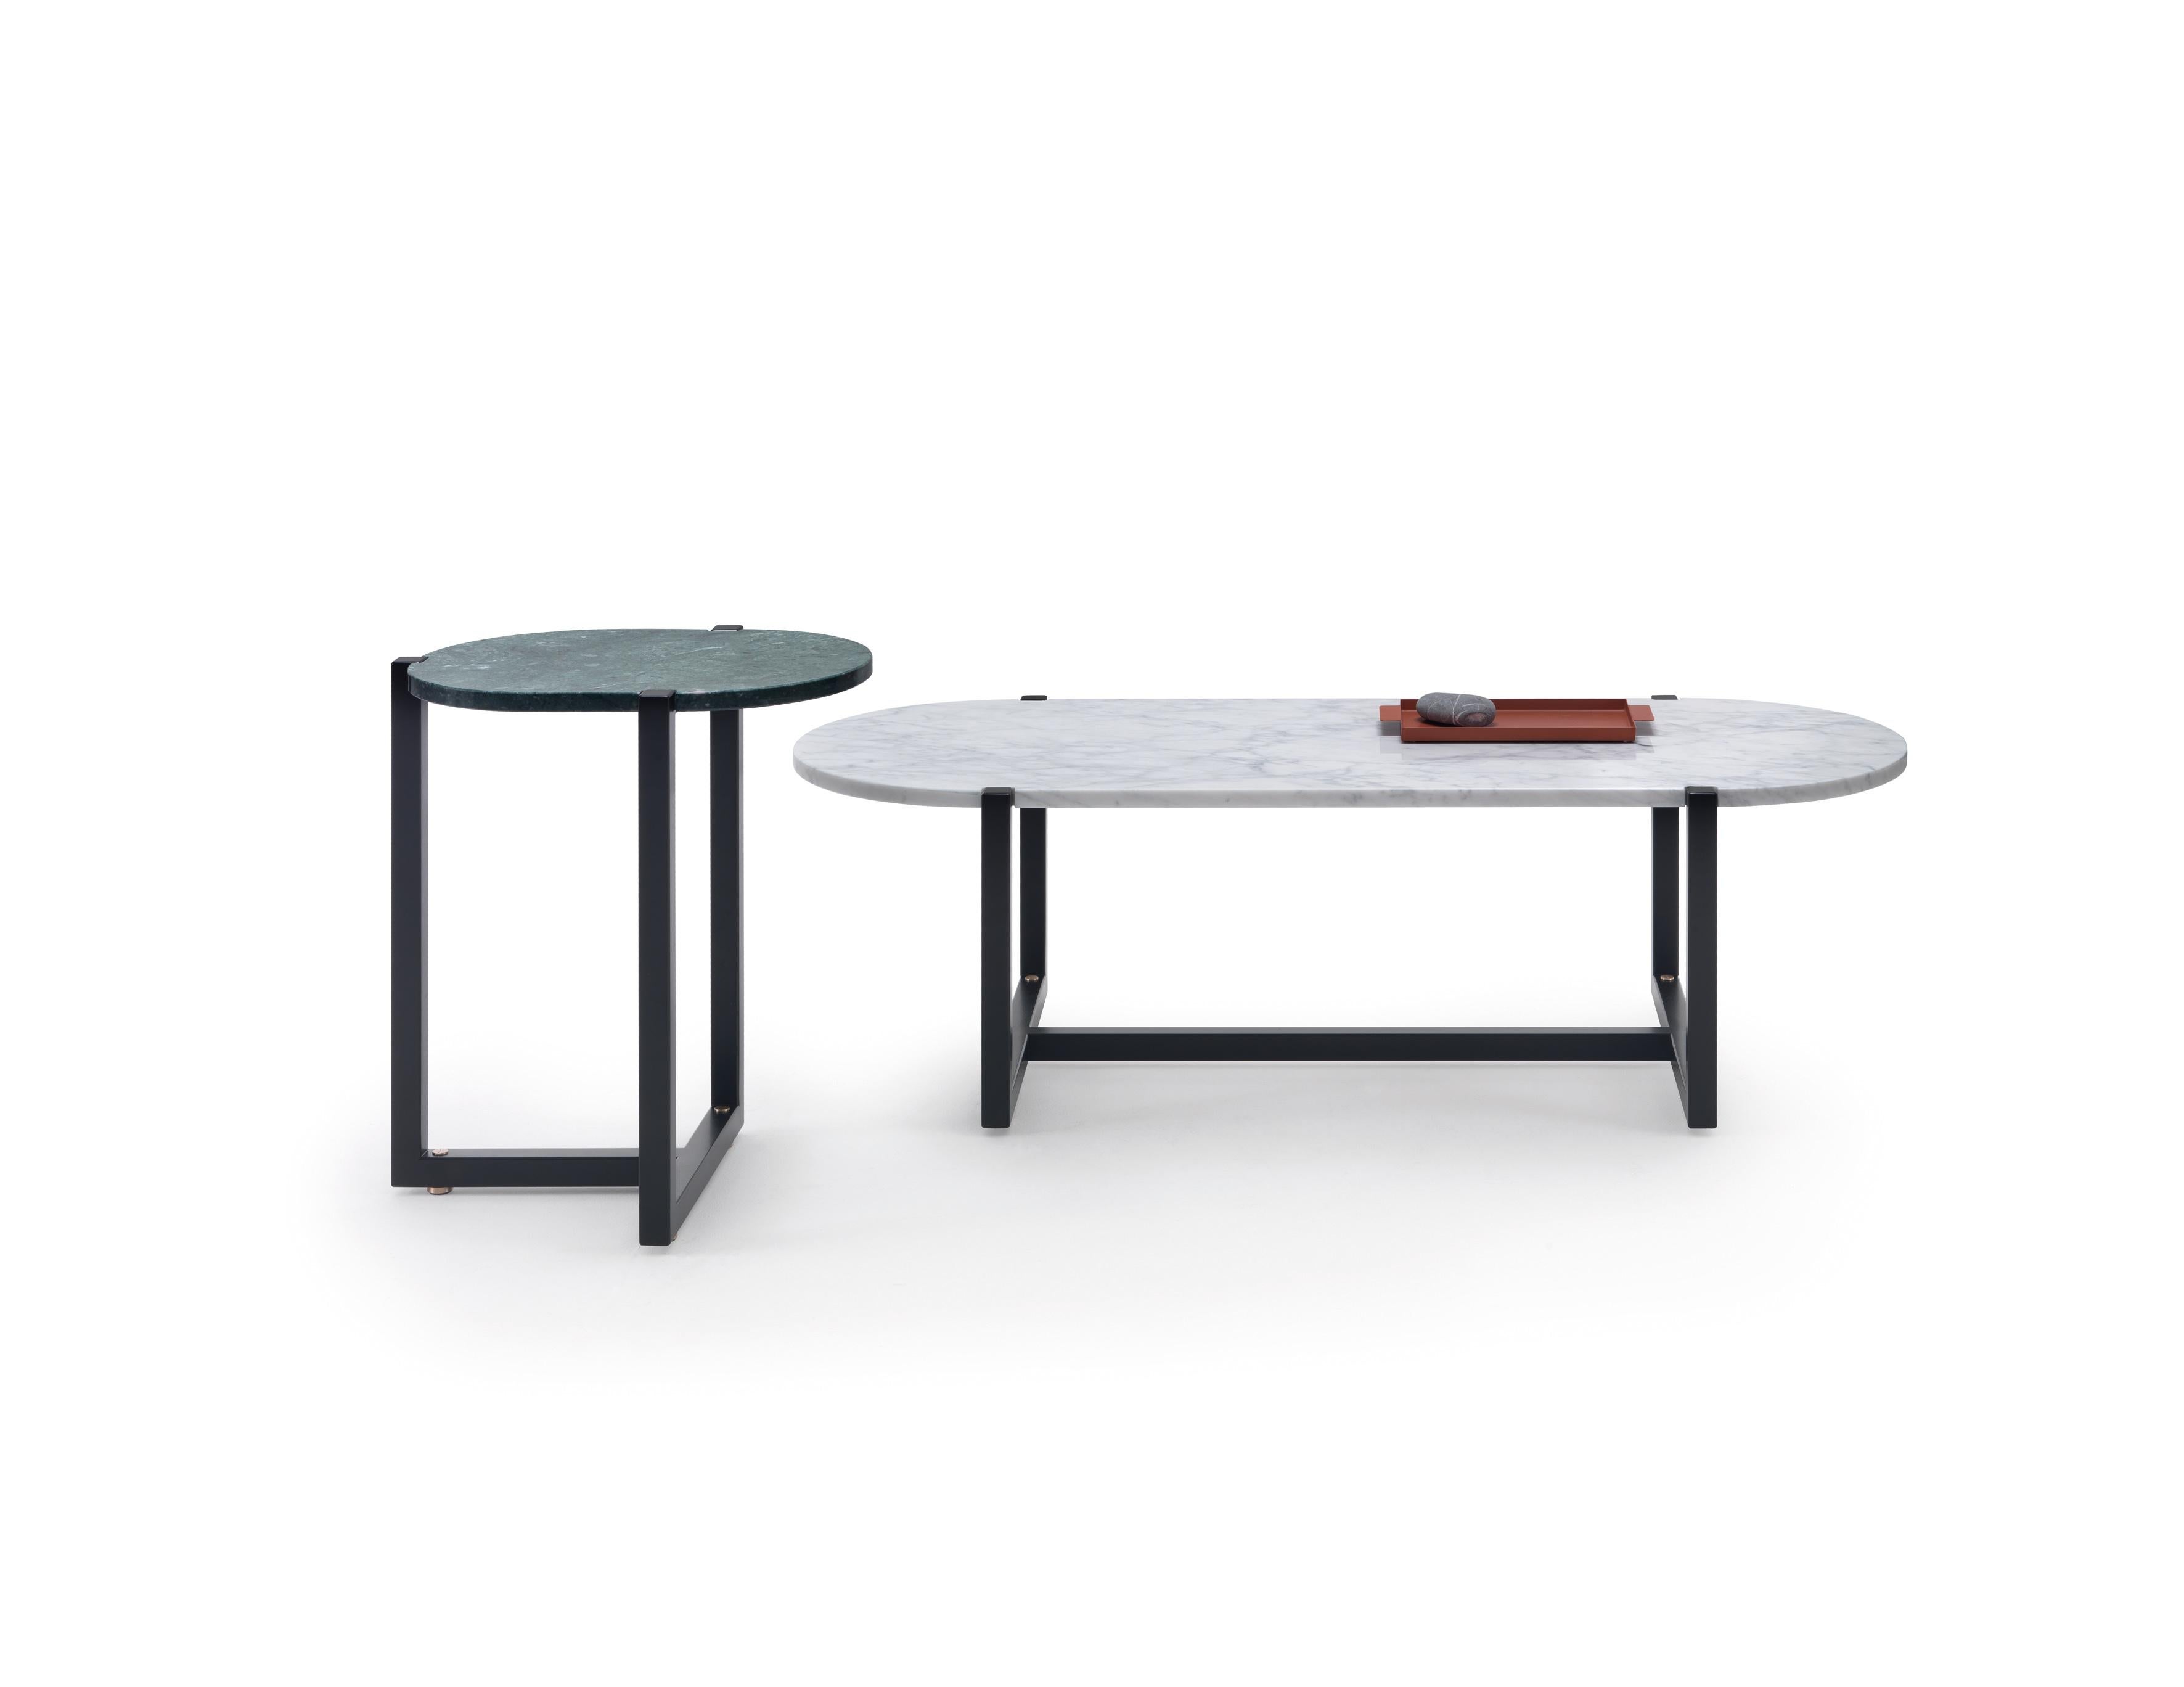 Arflex Sigmund Small Table in Marquinia Top with Metal Base by Studio Asai. To remain faithful to this search for interior honesty, the design of this collection reveals its constructive method.

Additional Information: 
Materials: Black